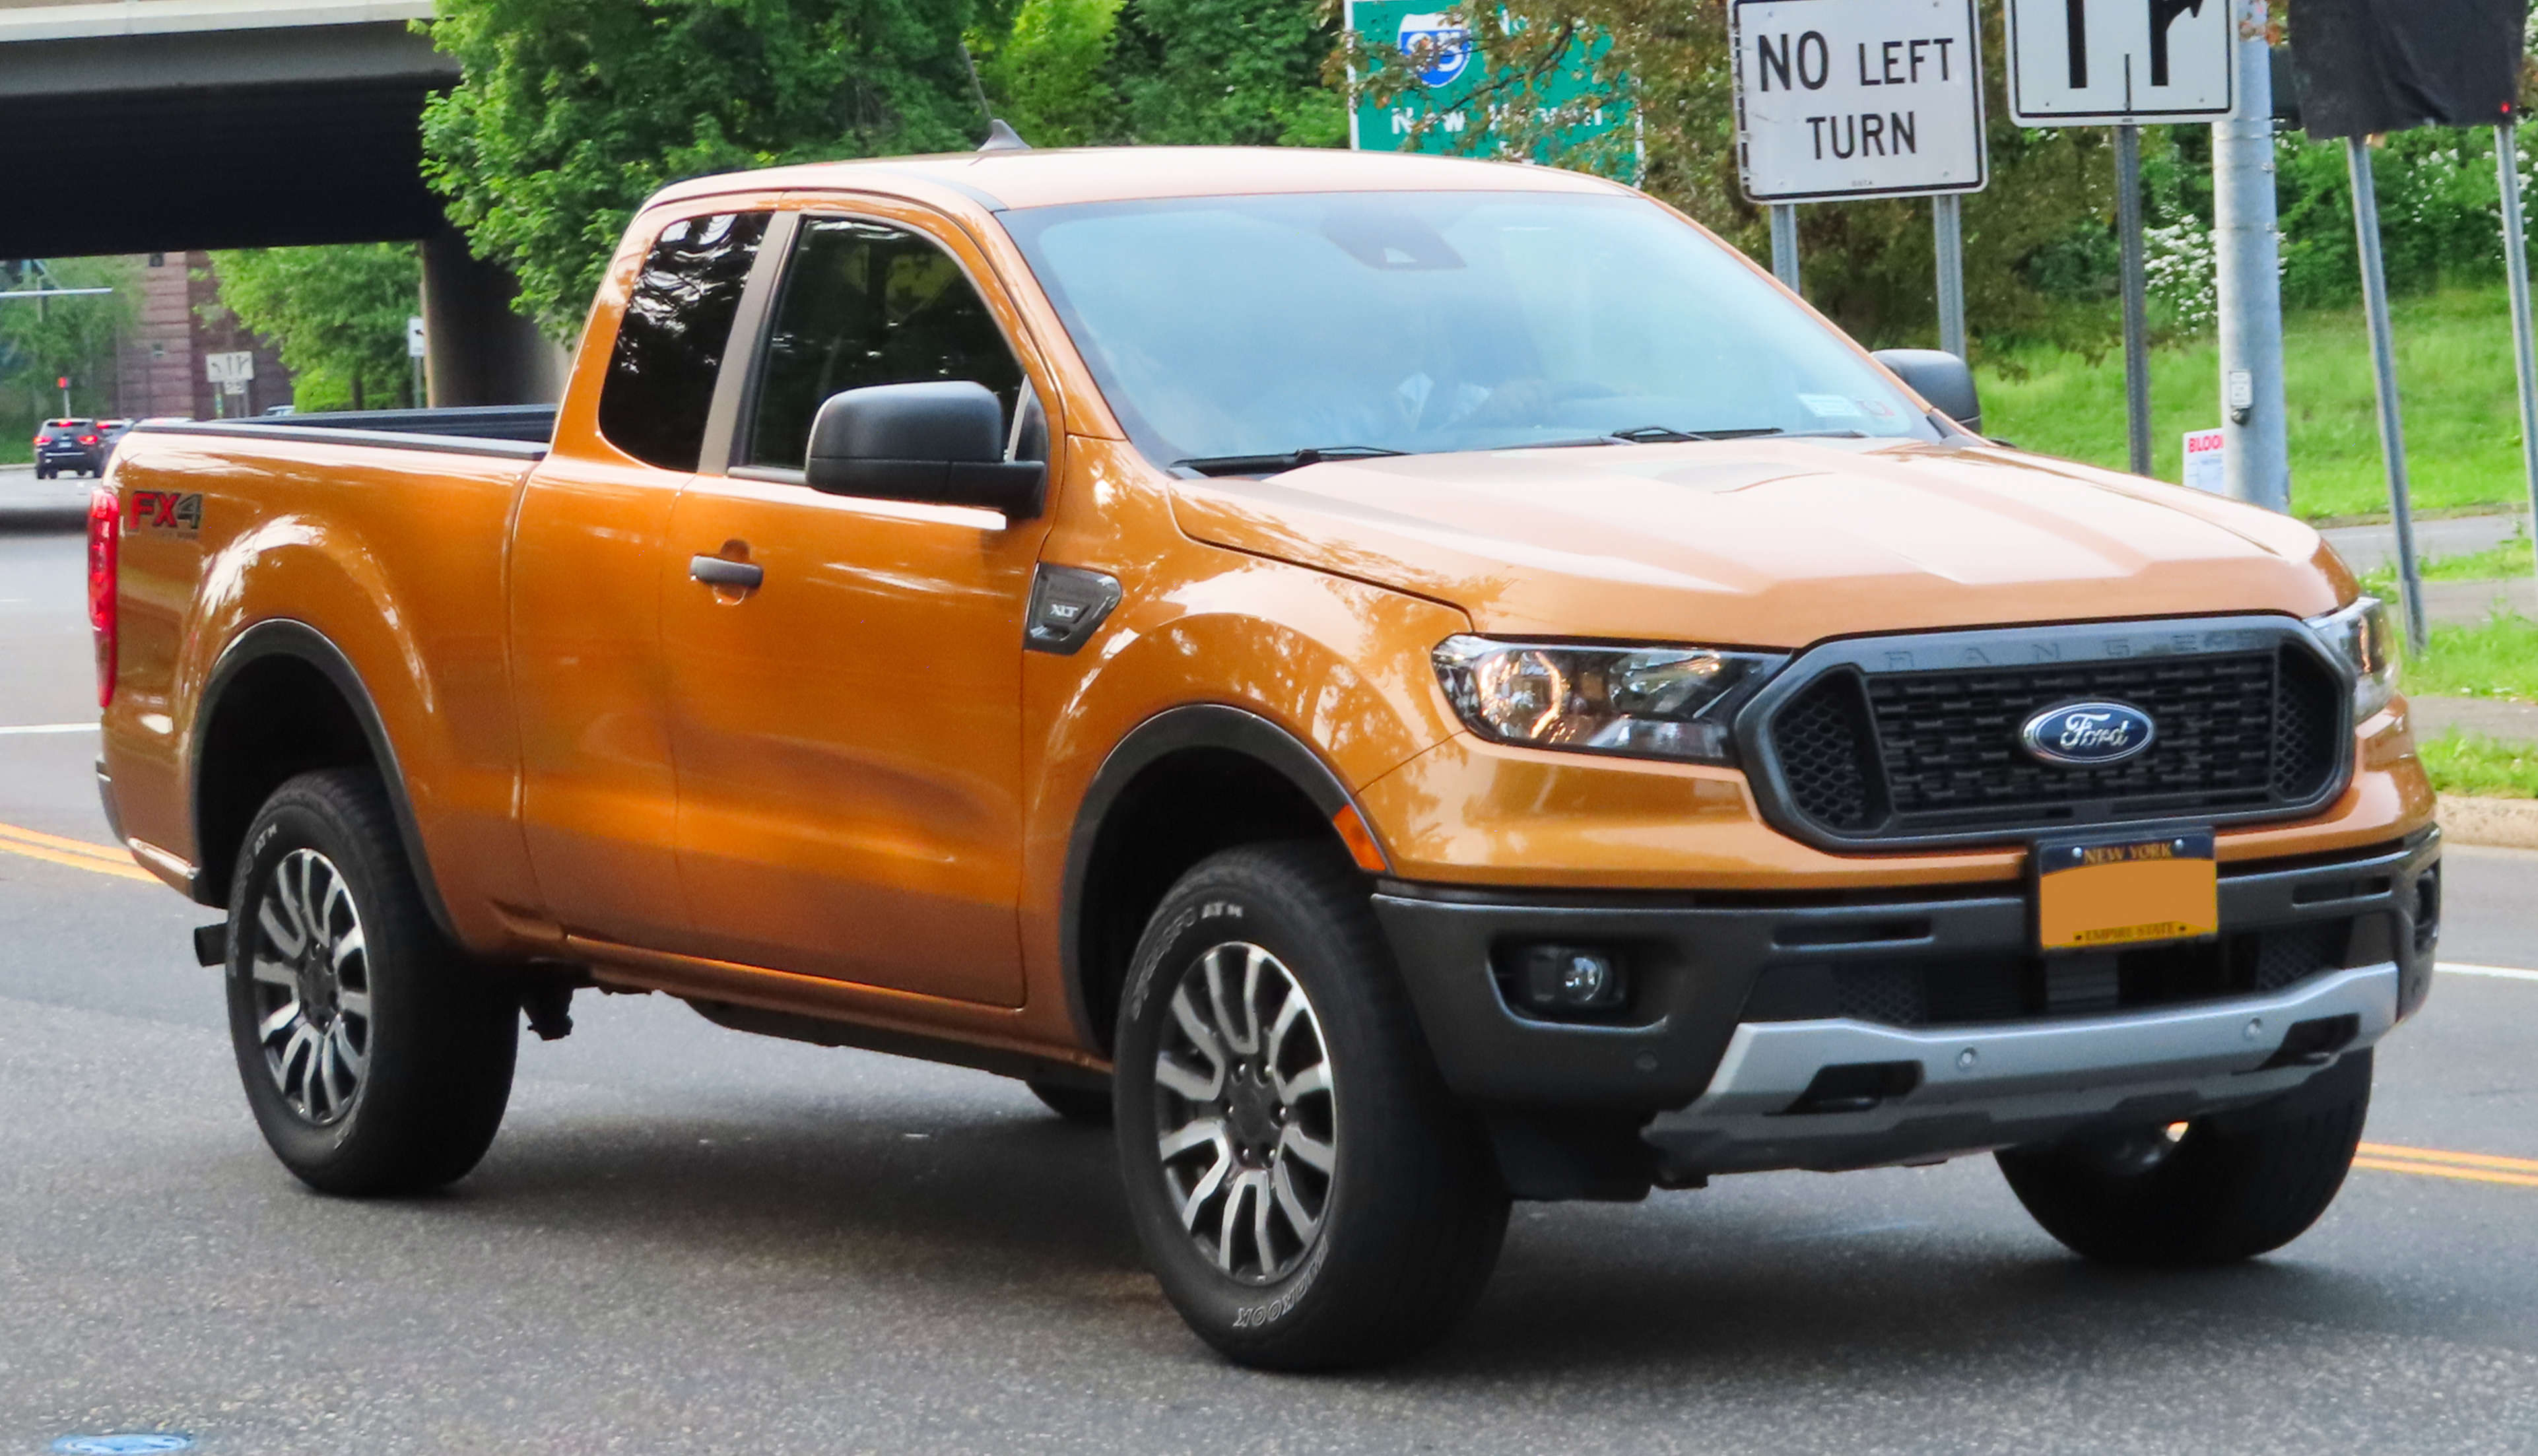 Vehicle Recall Ford Issues Recall For 2019 Ranger Over